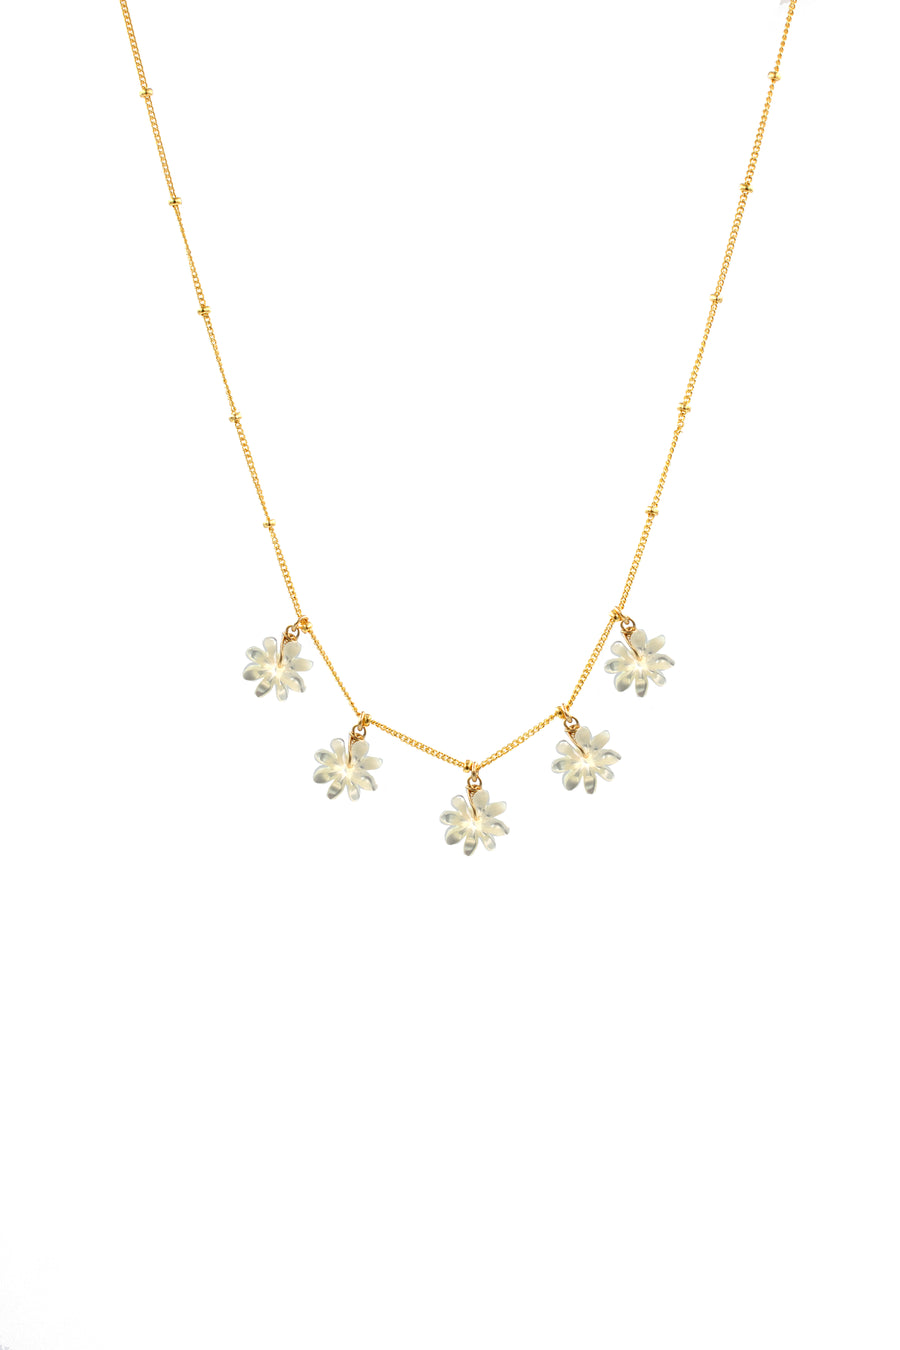 Mother of Pearl Flower Shaker Necklace